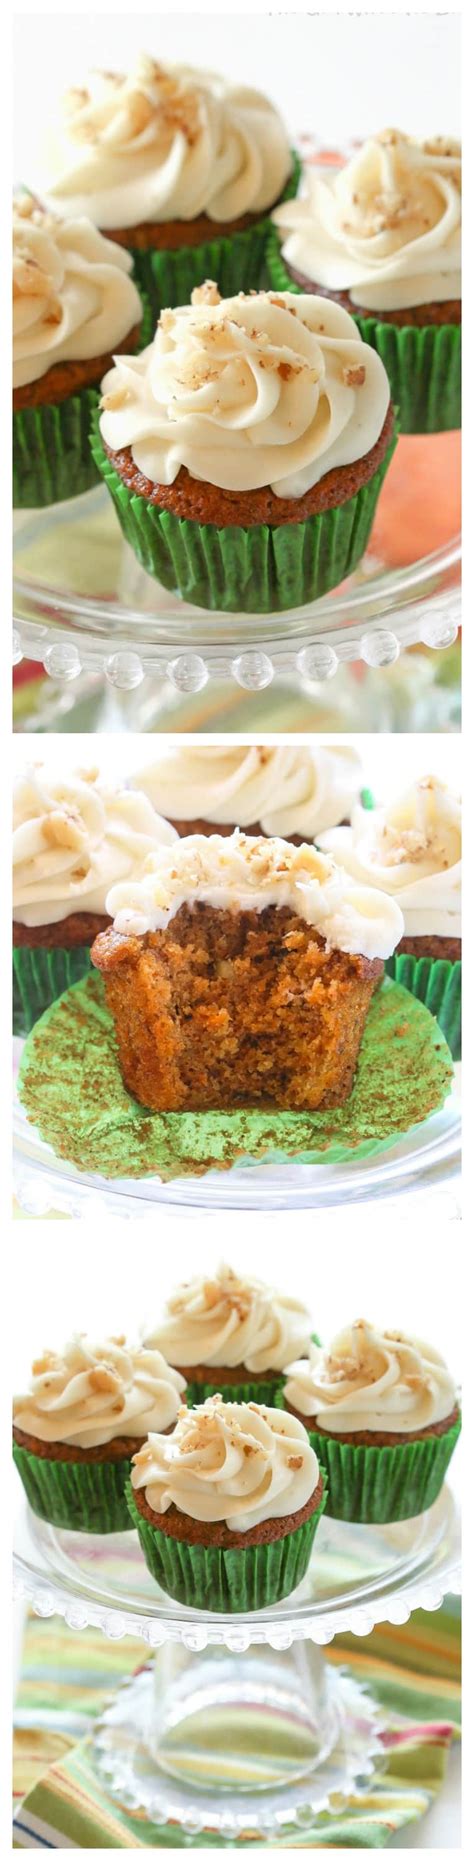 carrot-cupcakes-with-white-chocolate-cream-cheese image